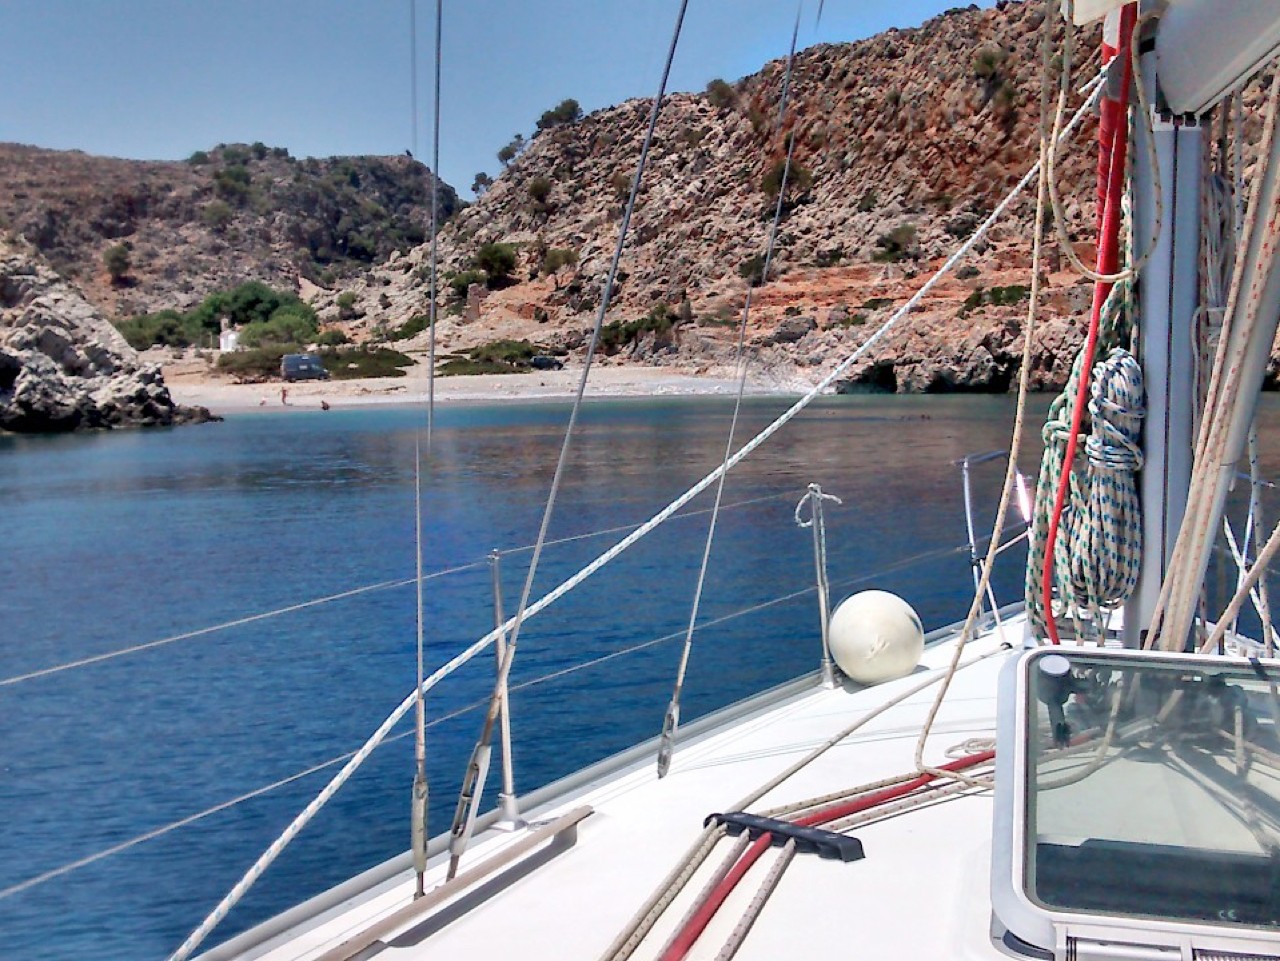 A Day Out Sailing Chania, Short Day Private sailing Tour, sailing chania crete, sailing activities chania, chania activities, best sailing trip chania crete, chania sailing theodorou island, agioi theodoroi island sailing chania, sail fishing summer, sailing in Crete